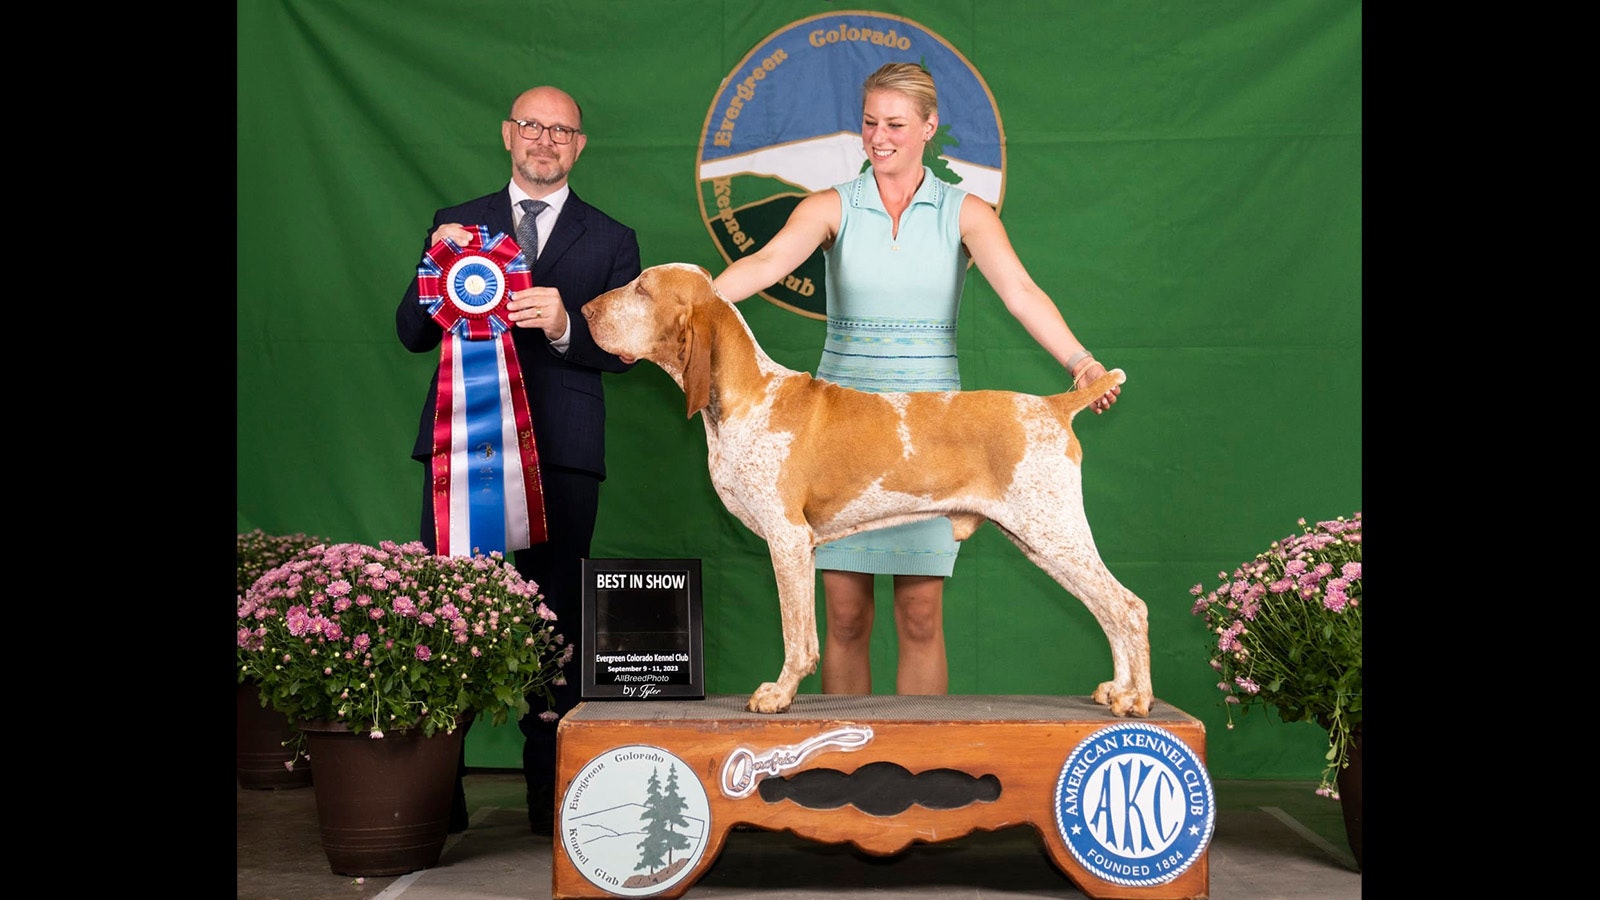 Rowan was named Best in Show at the Evergreen Colorado Kennel Club during a competition in September.